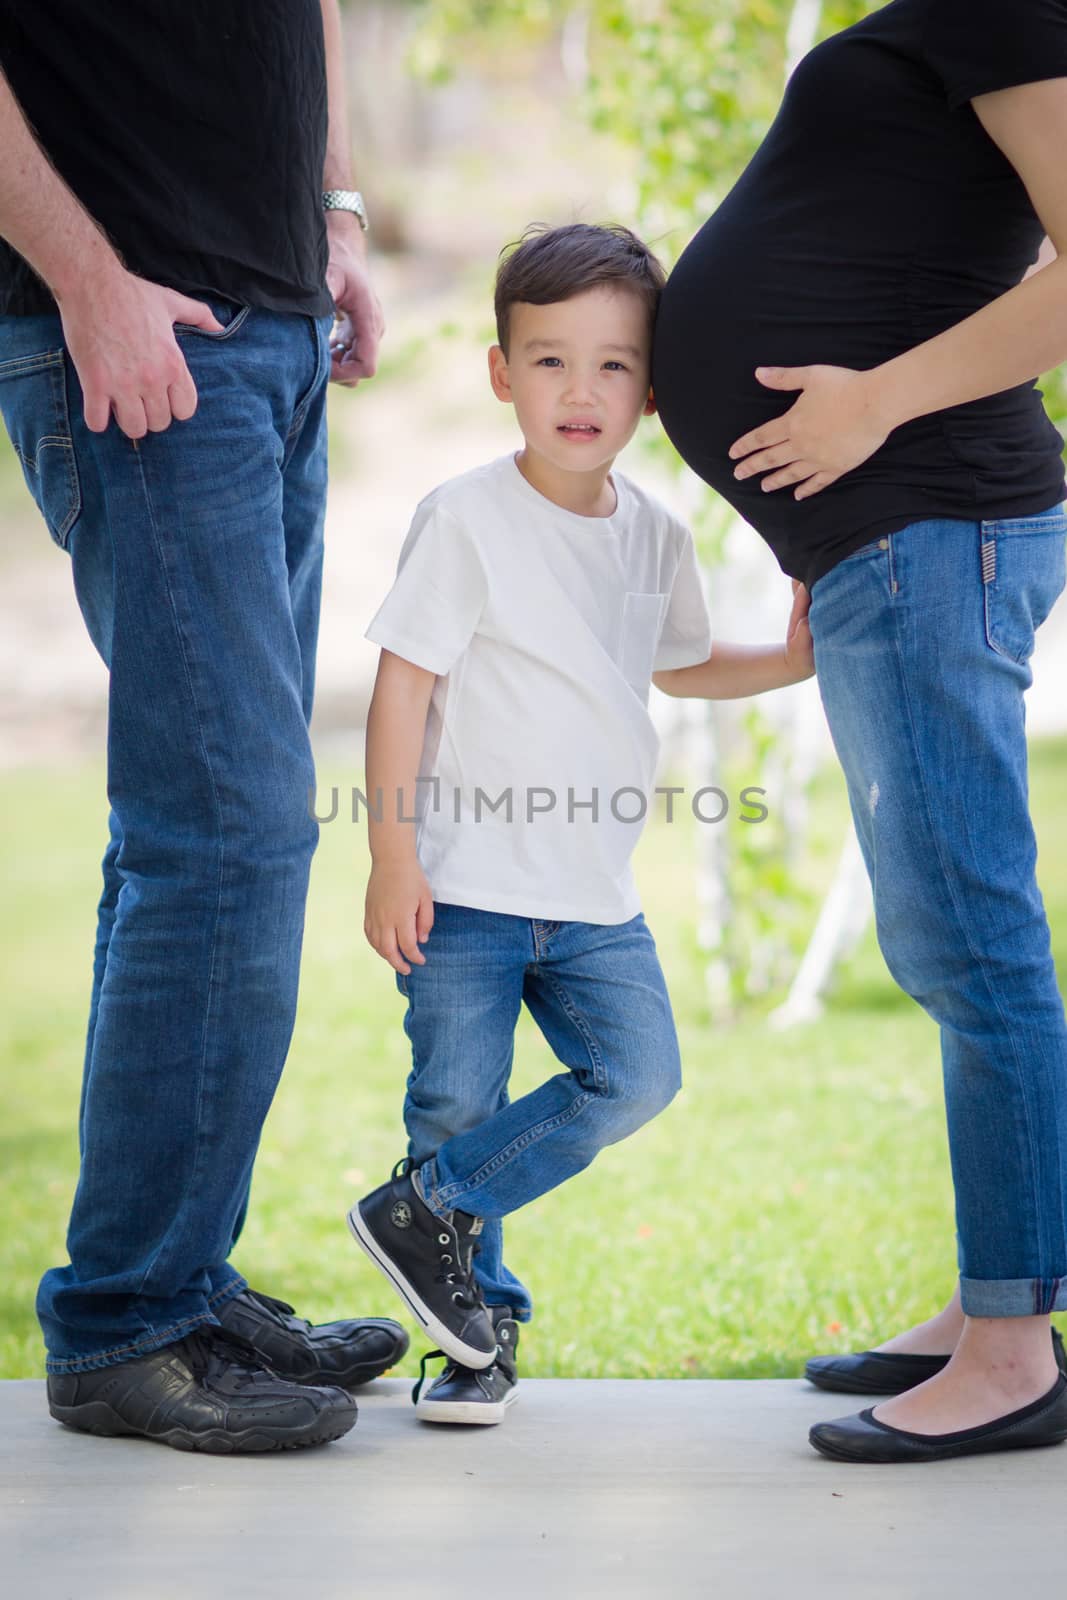 Courious Young Mixed Race Son With Ear on Pregnant Belly of Mommy with Daddy Nearby.